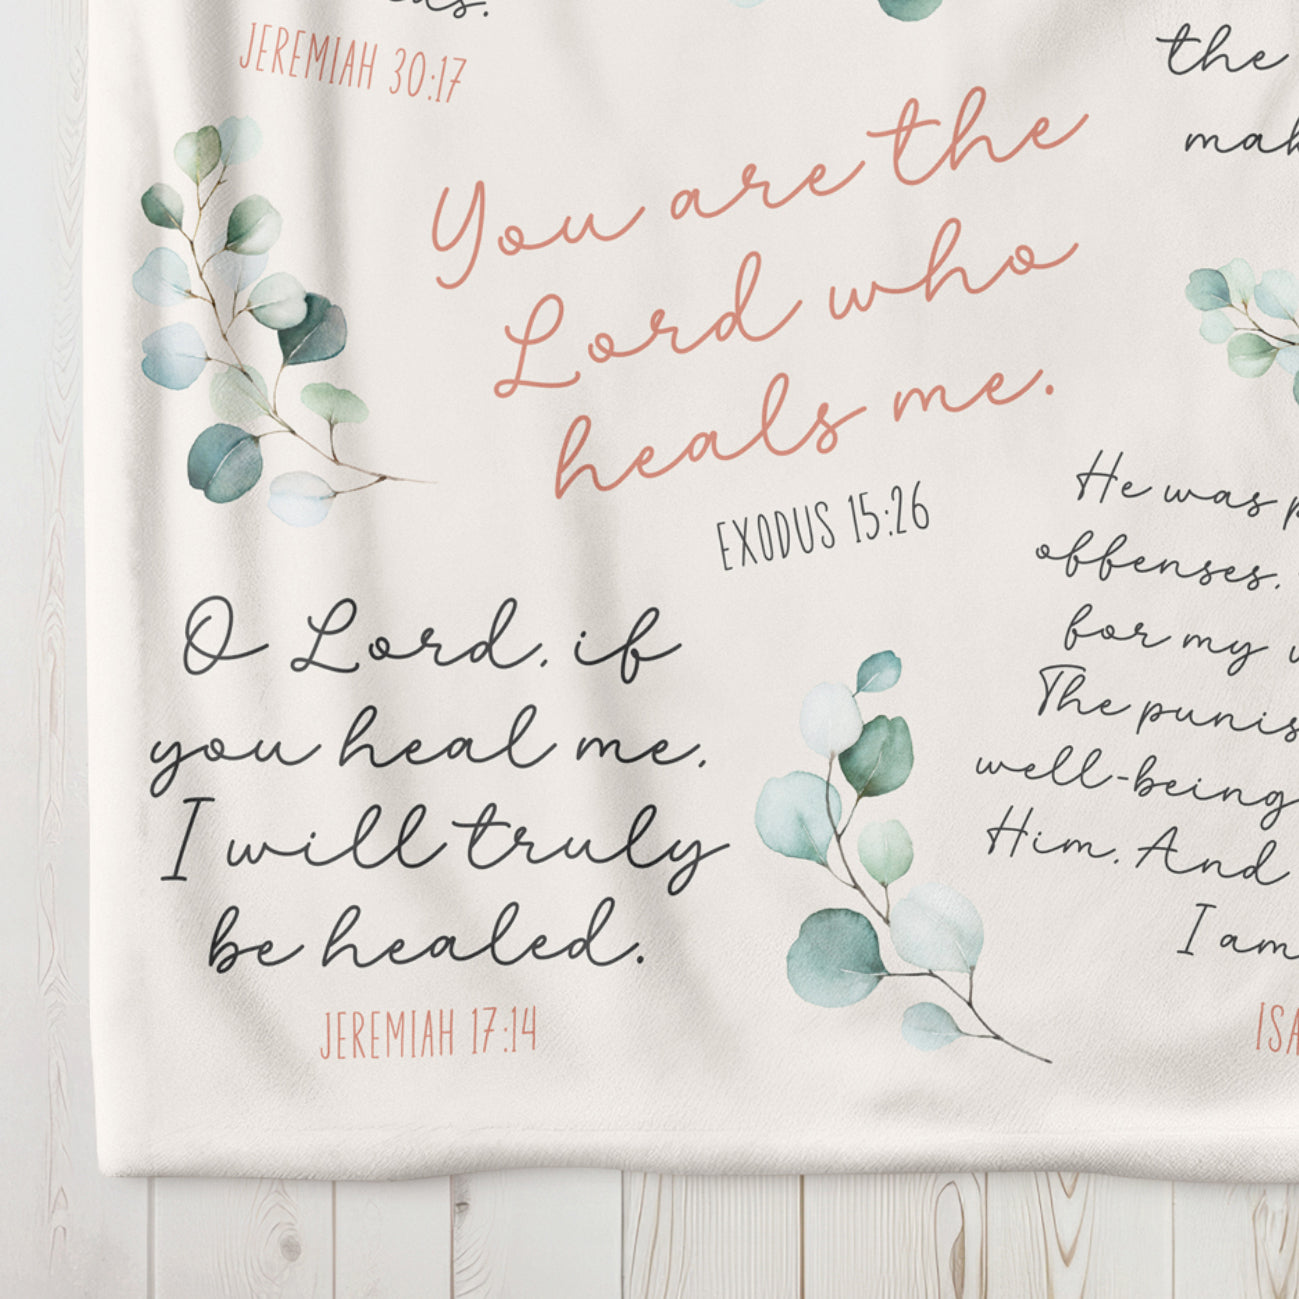 Healing Scriptures velveteen minky throw / lap / bed blanket, prayer shawl gift, bible verses word of God from Psalms, 2 Kings, James, Isaiah, Jeremiah, Exodus, in charcoal gray, ivory, and dusty pink with sage green watercolor eucalyptus in 50 x 60 inch or 60 x 80 inch sizes